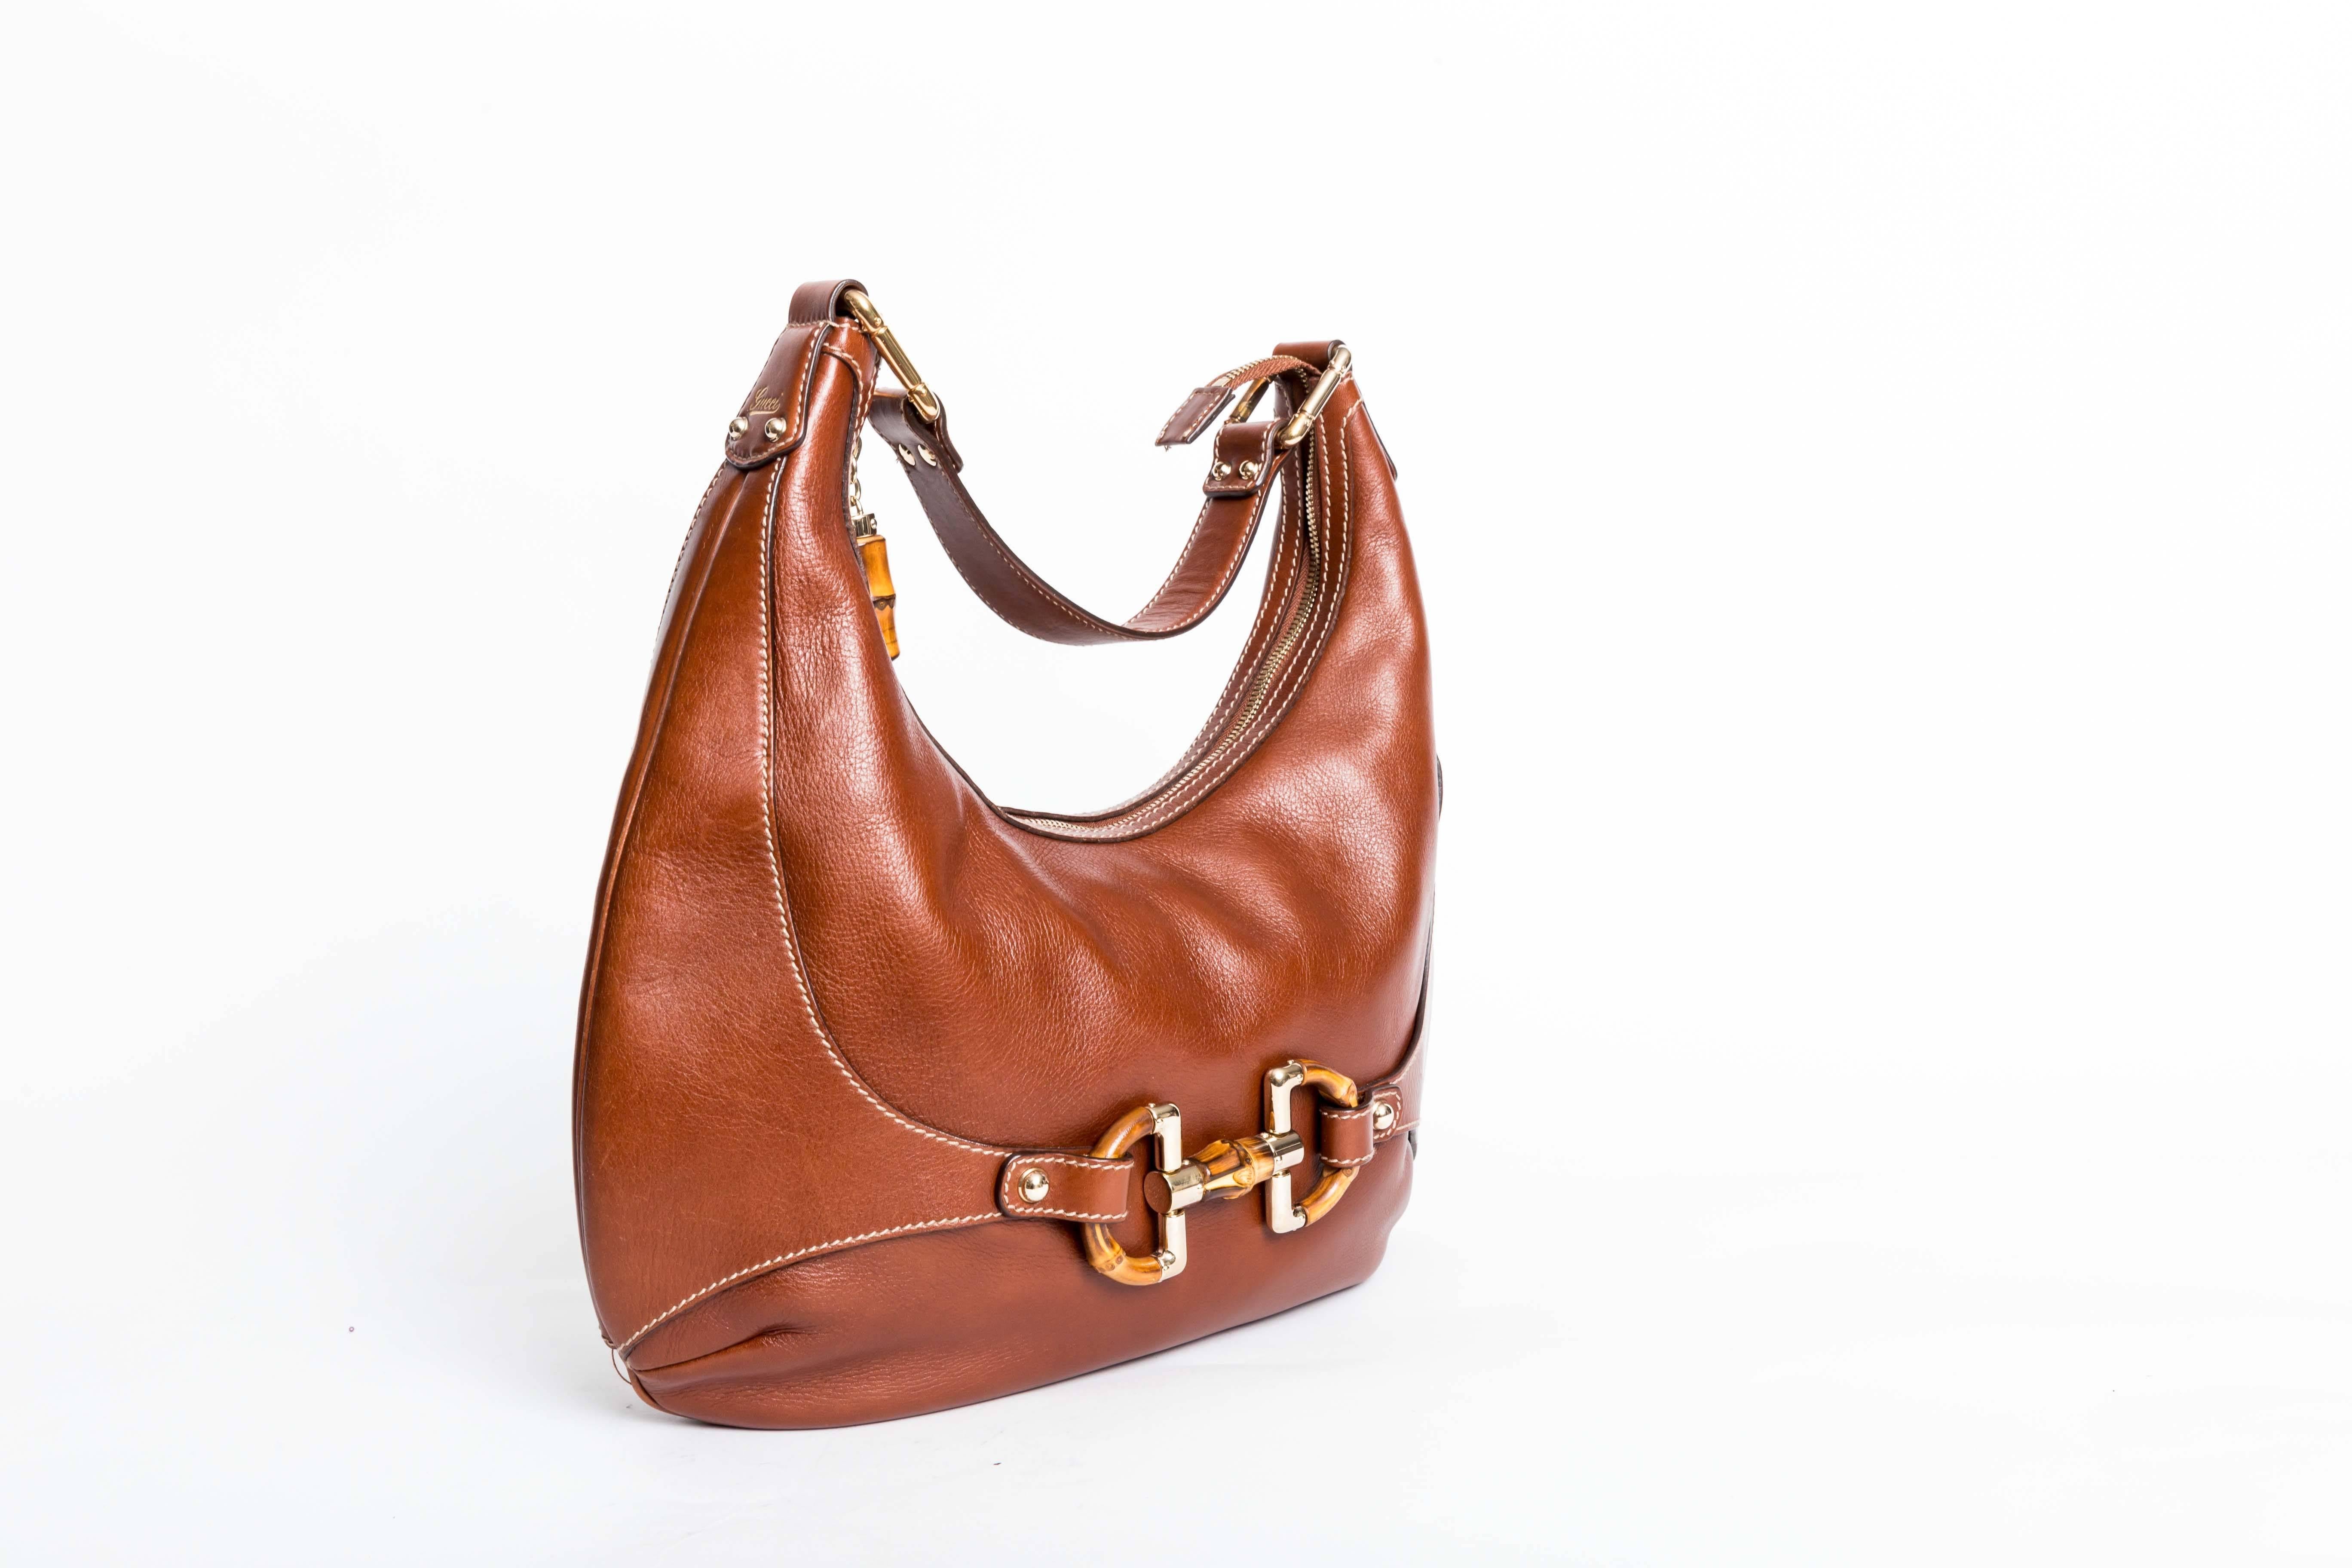 Gucci Horsebit Saddle Bag in Brown Leather. Bamboo iconic horsebit adorns the front of this beautiful bag. Zip Top with Bamboo Pull. Bag measures 14 inches in length and 9.5 inches at the center of the bag graduating to 15 inches at each end. The